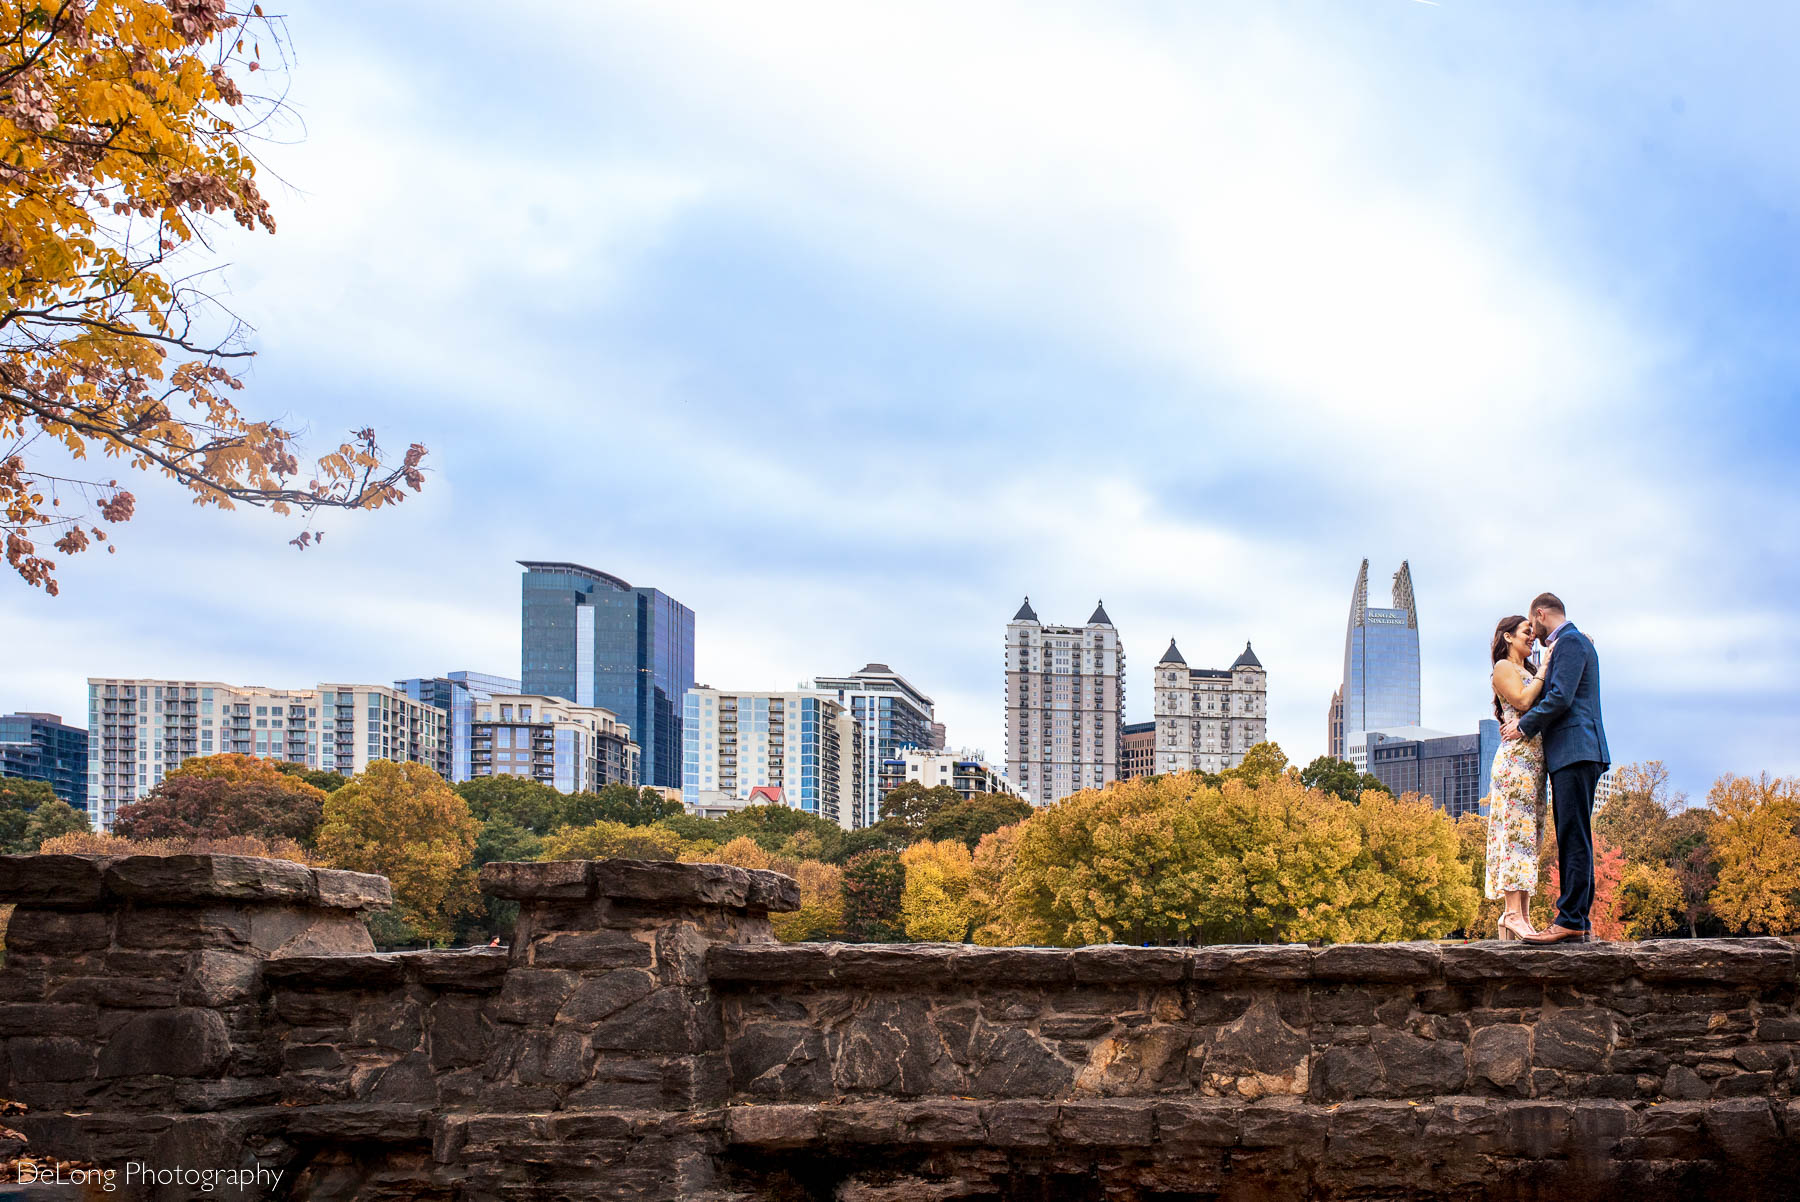 Wide scenery image of the fall foliage and Atlanta city skyline with an engaged couple standing on a stone wall with their foreheads together on the right-hand side at Piedmont Park in Atlanta by Charlotte wedding photographers DeLong Photography